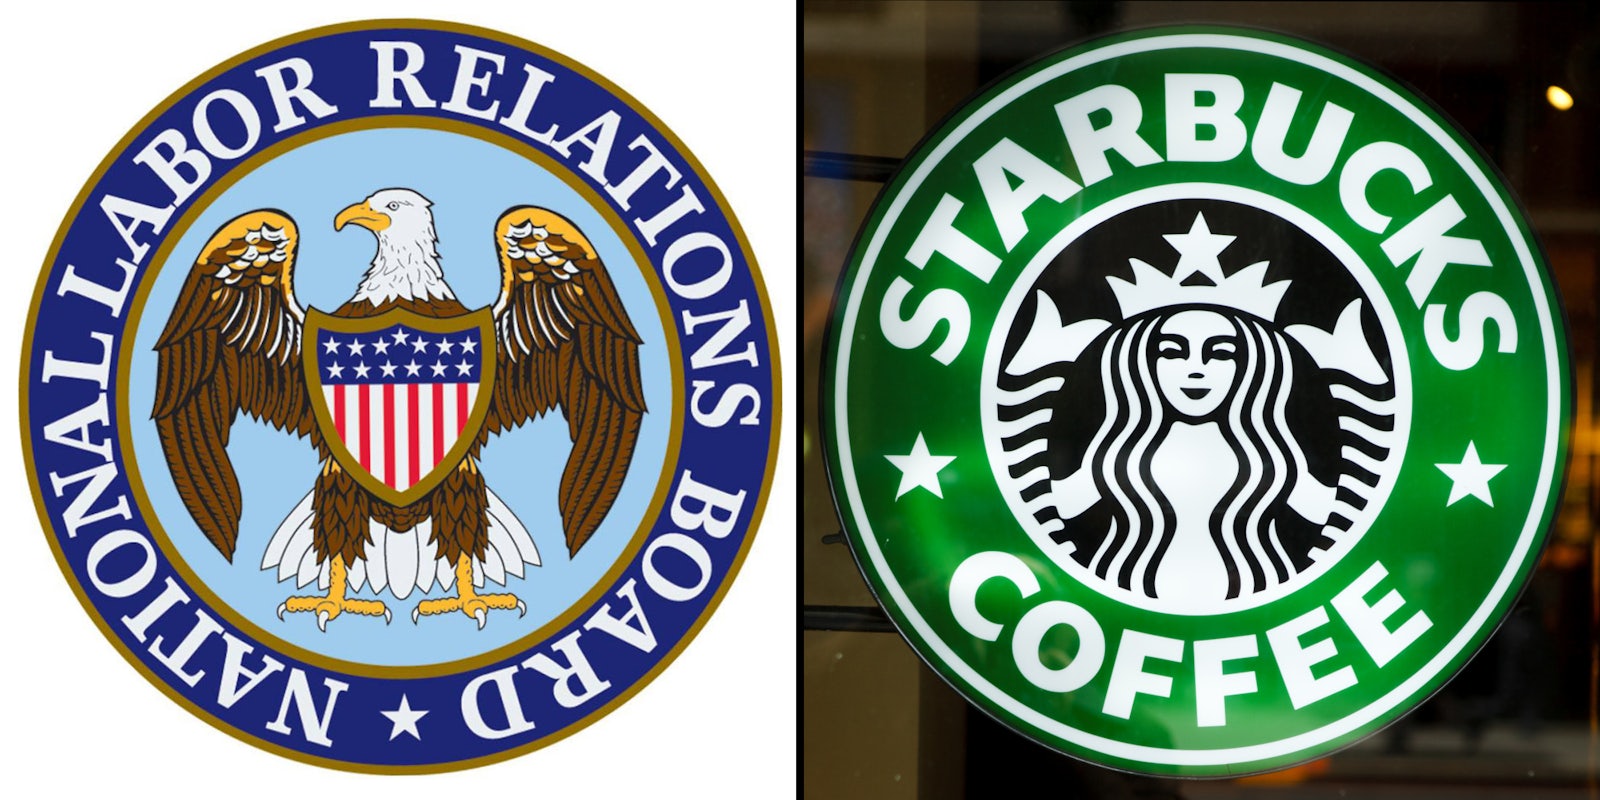 National Labor Relations Board logo on white background (l) starbucks light up circular sign with logo on glass (r)